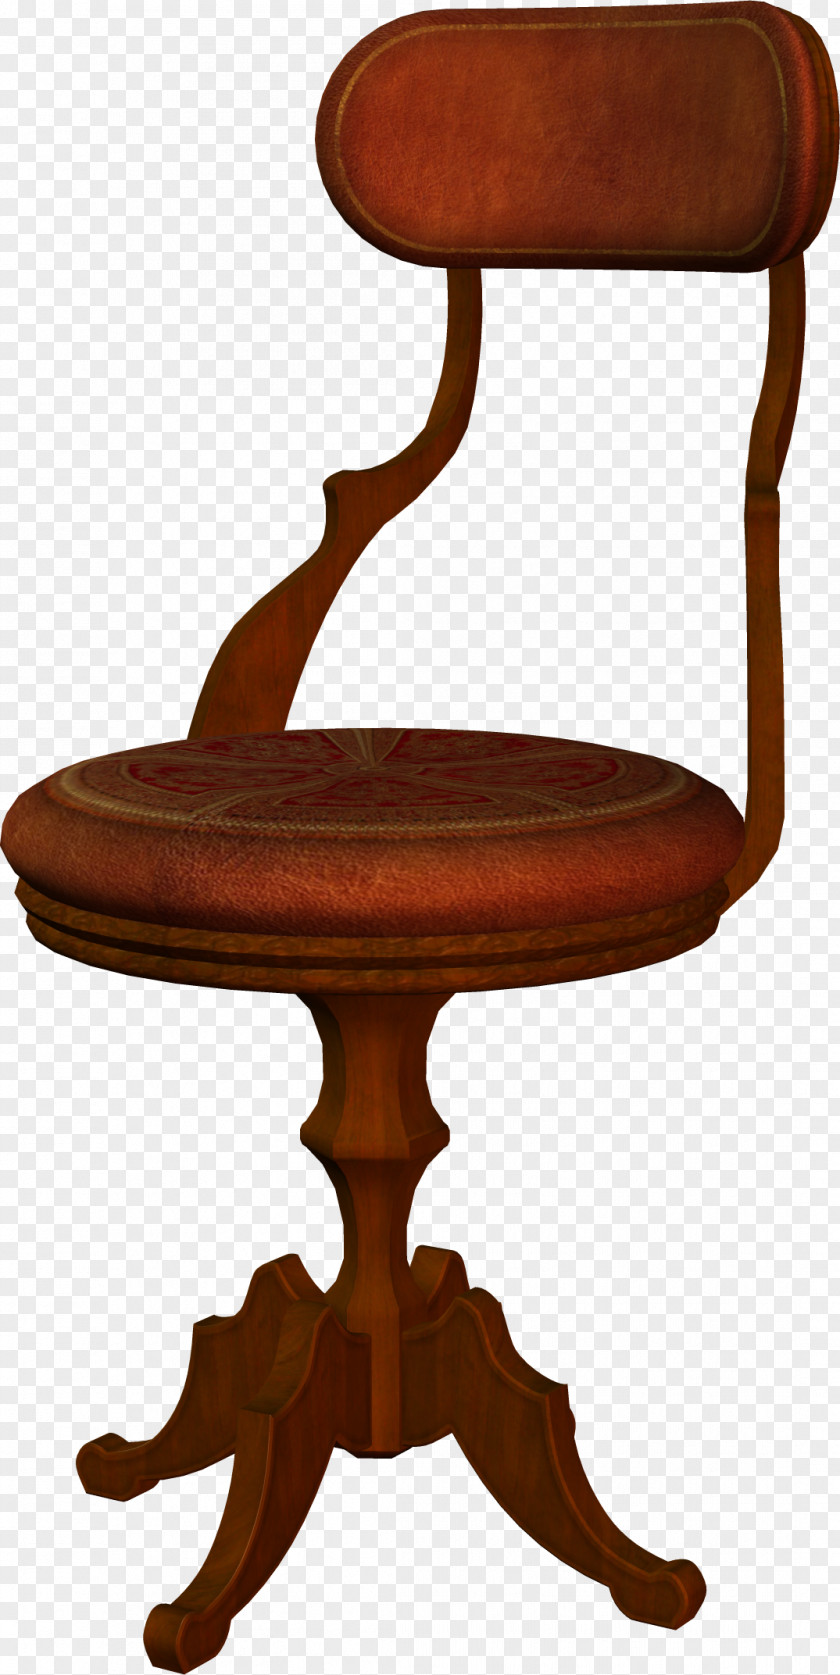 Bartender Table Furniture Chair Clip Art PNG